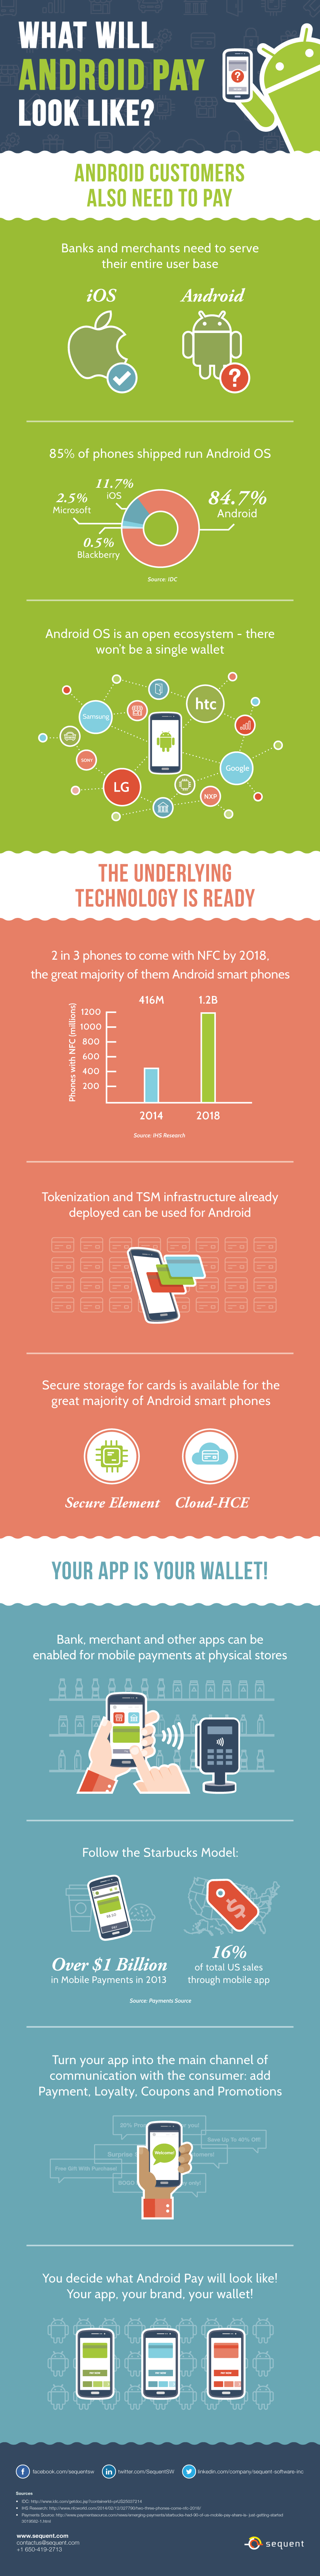 Infographic-What-Will-Android-Pay-Look-Like